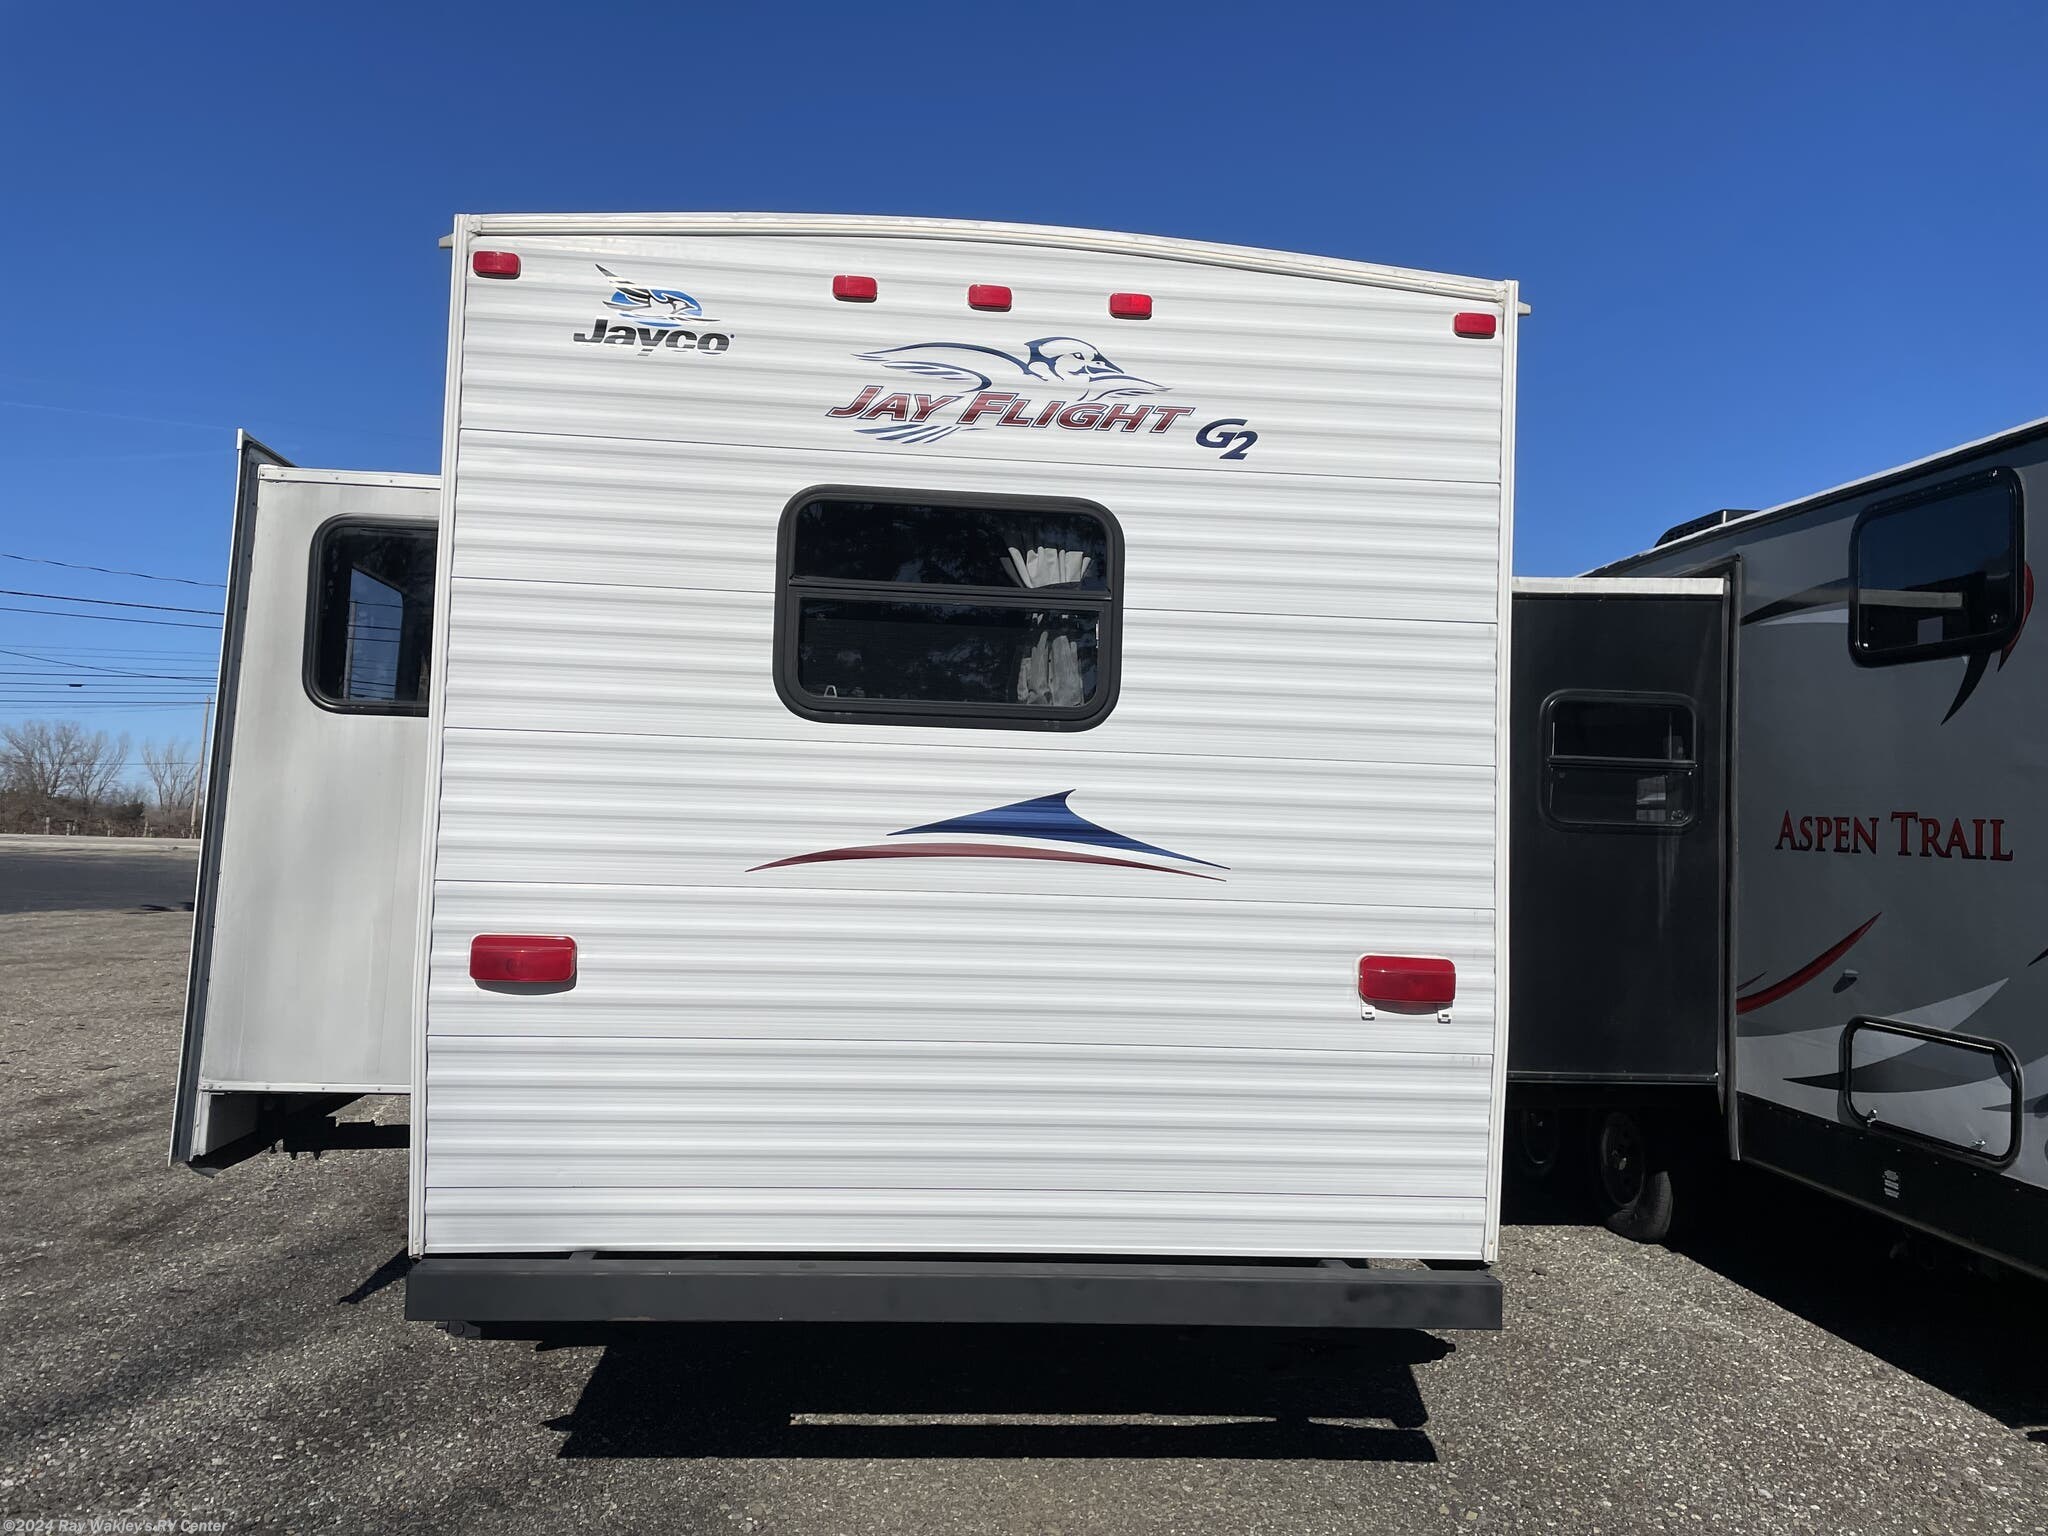 2008 Jayco Jay Flight G2 29 Bhs Rv For Sale In North East Pa 16428